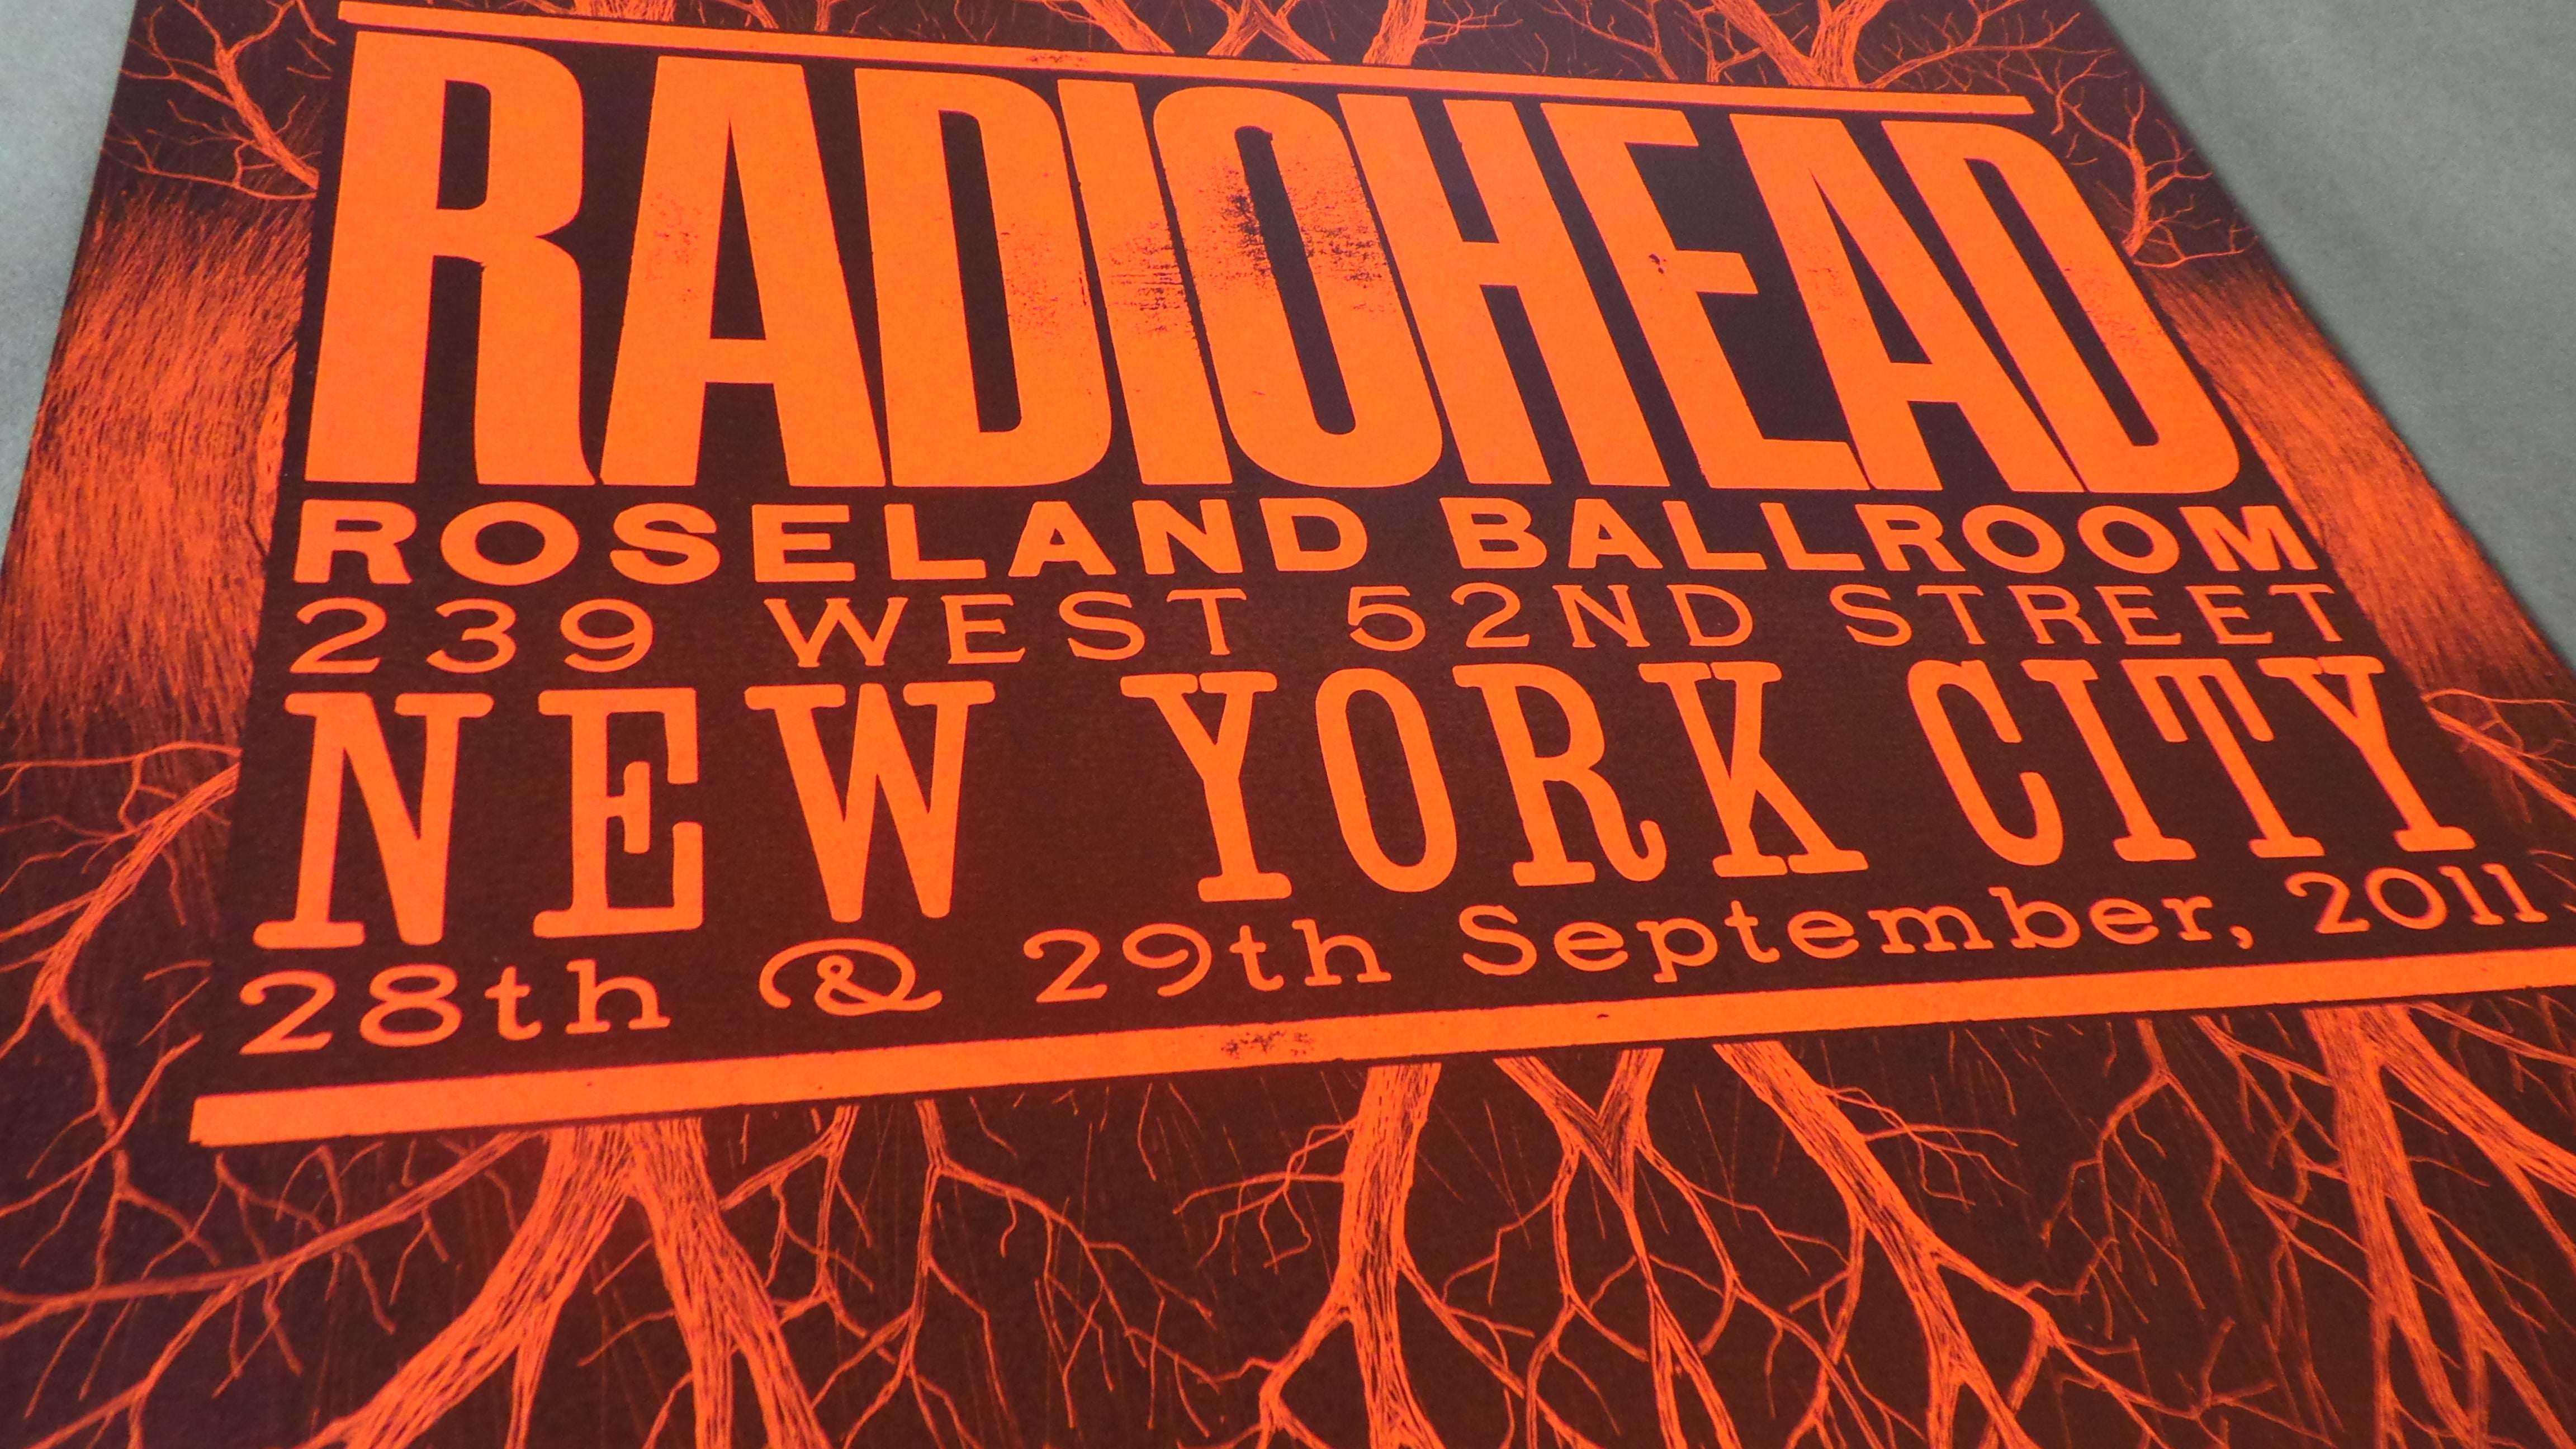 Title: Radiohead (Roseland Ballroom NYC 2011, Blood Orange)  Artist: Stanley Donwood  Edition:  xx/150  Type: Screen print poster  Size: 16.5" x 23.5"  Location: New York City, NY  Venue: Roseland Ballroom  Notes: Created for the band's shows on 9/28-9/29/11 at the Roseland Ballroom in New York City.  Released in limited edition of 150 signed and hand numbered by the artist.